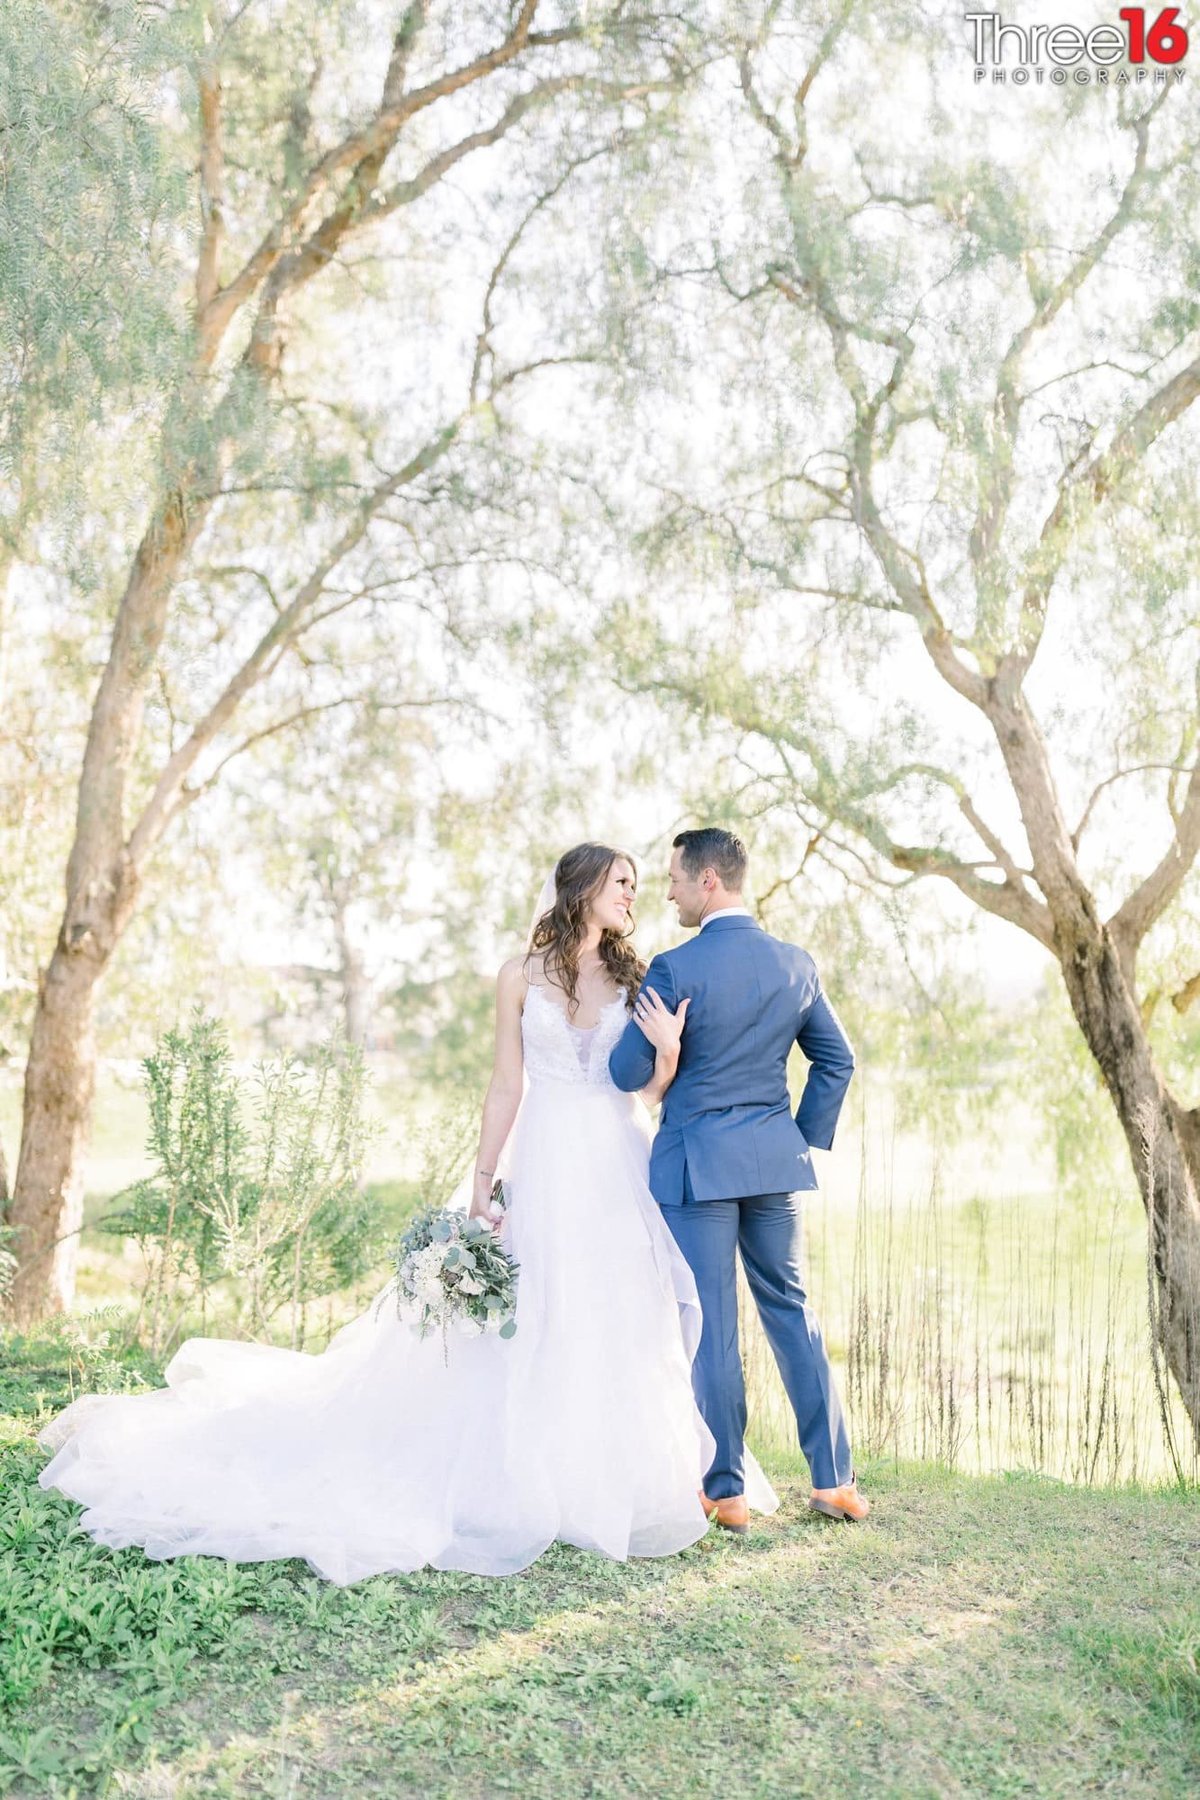 Bride and Groom are eye to eye while in the wood-like area in Yorba Linda, CA